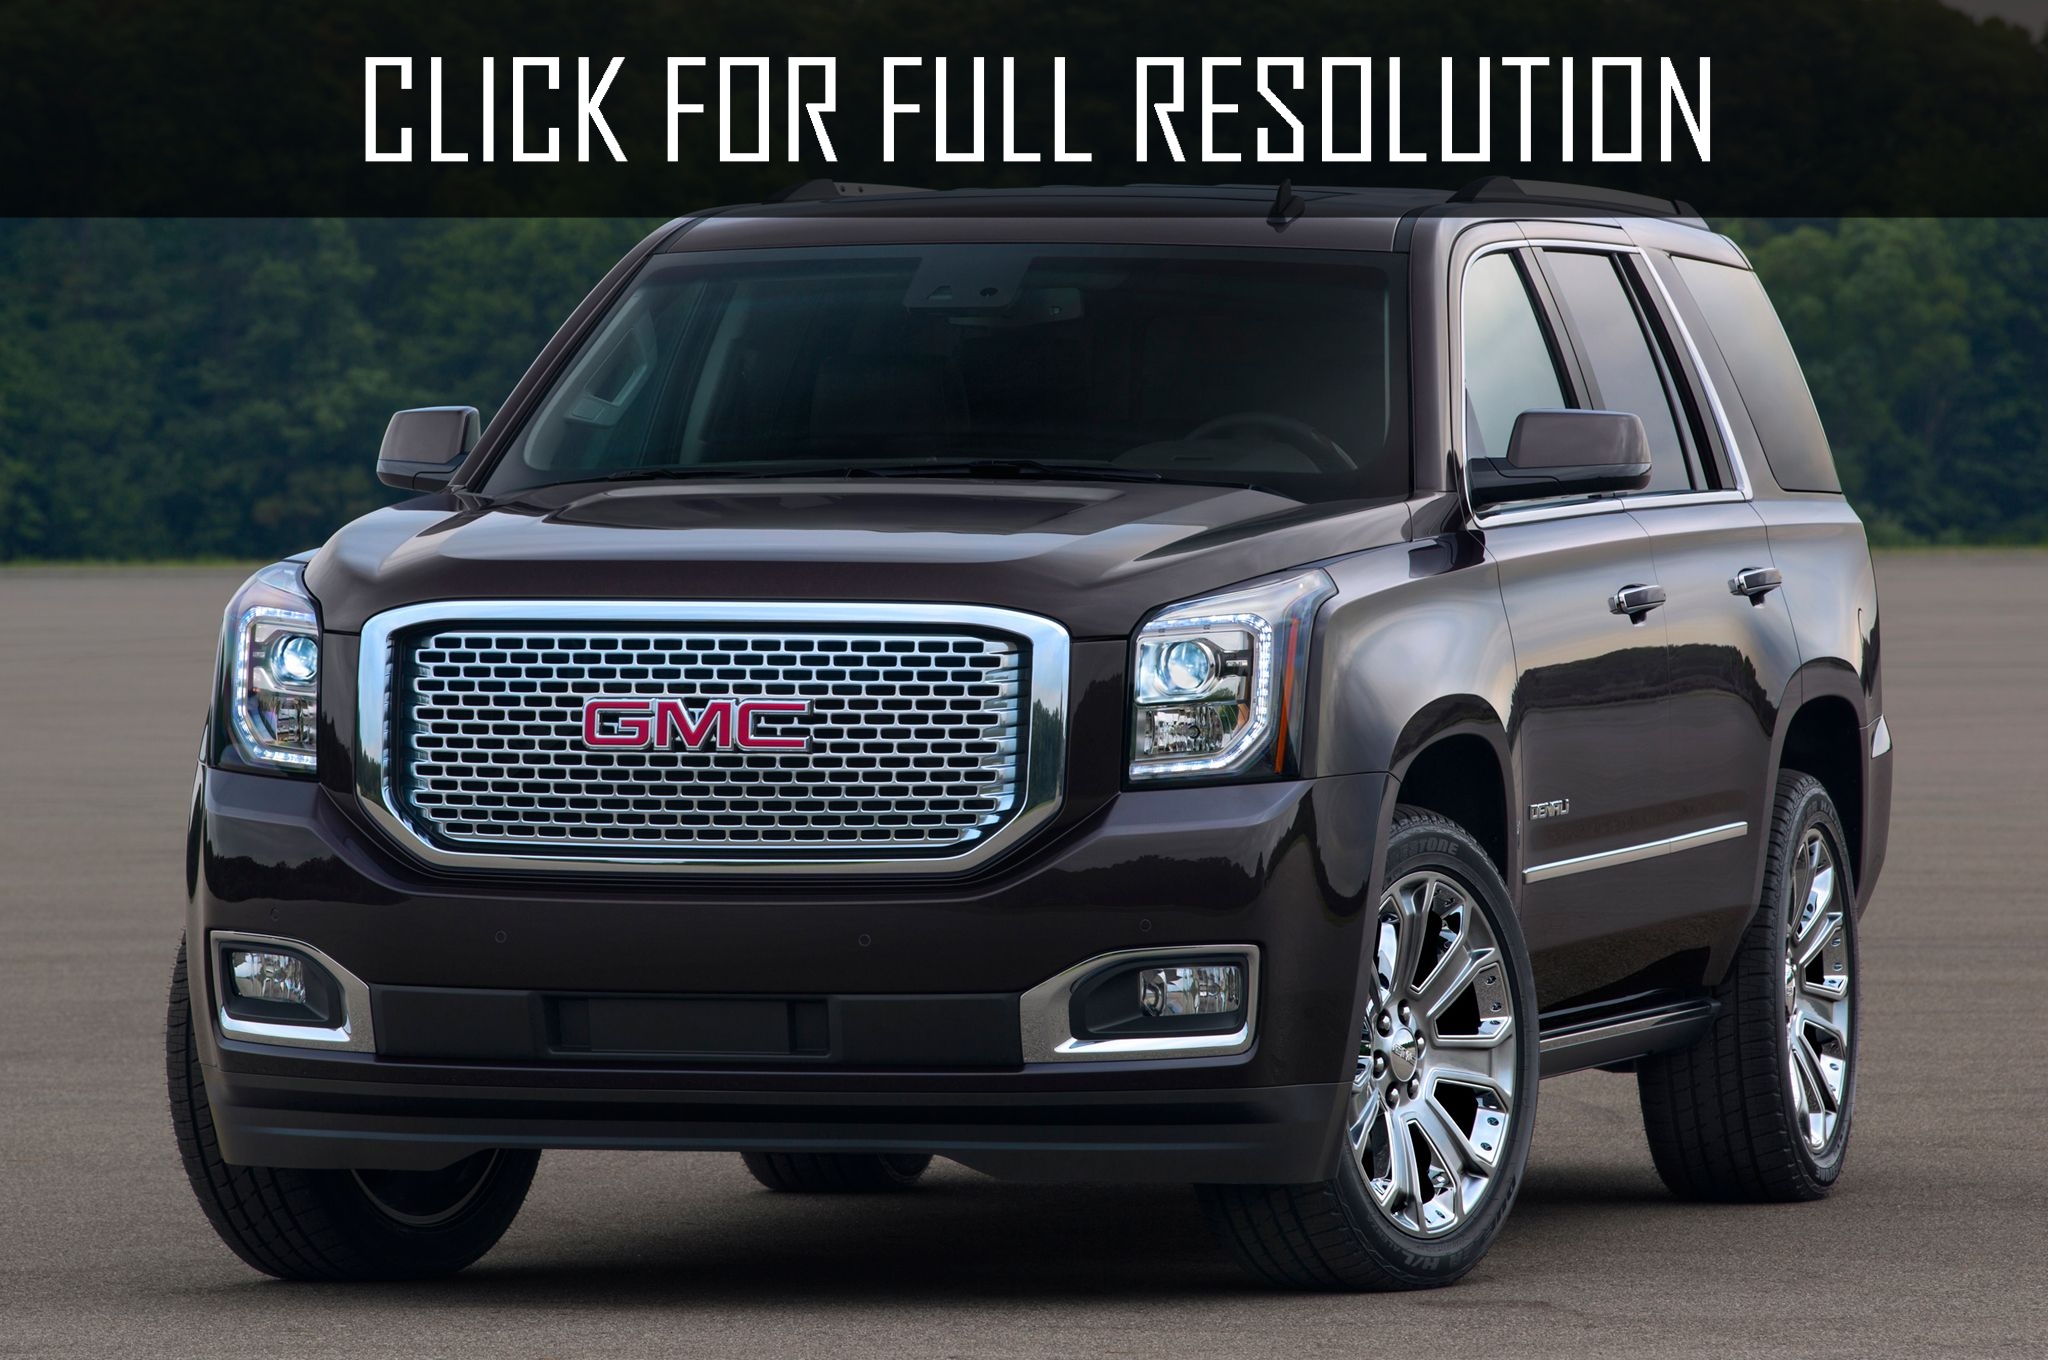 Gmc Tahoe amazing photo gallery, some information and specifications